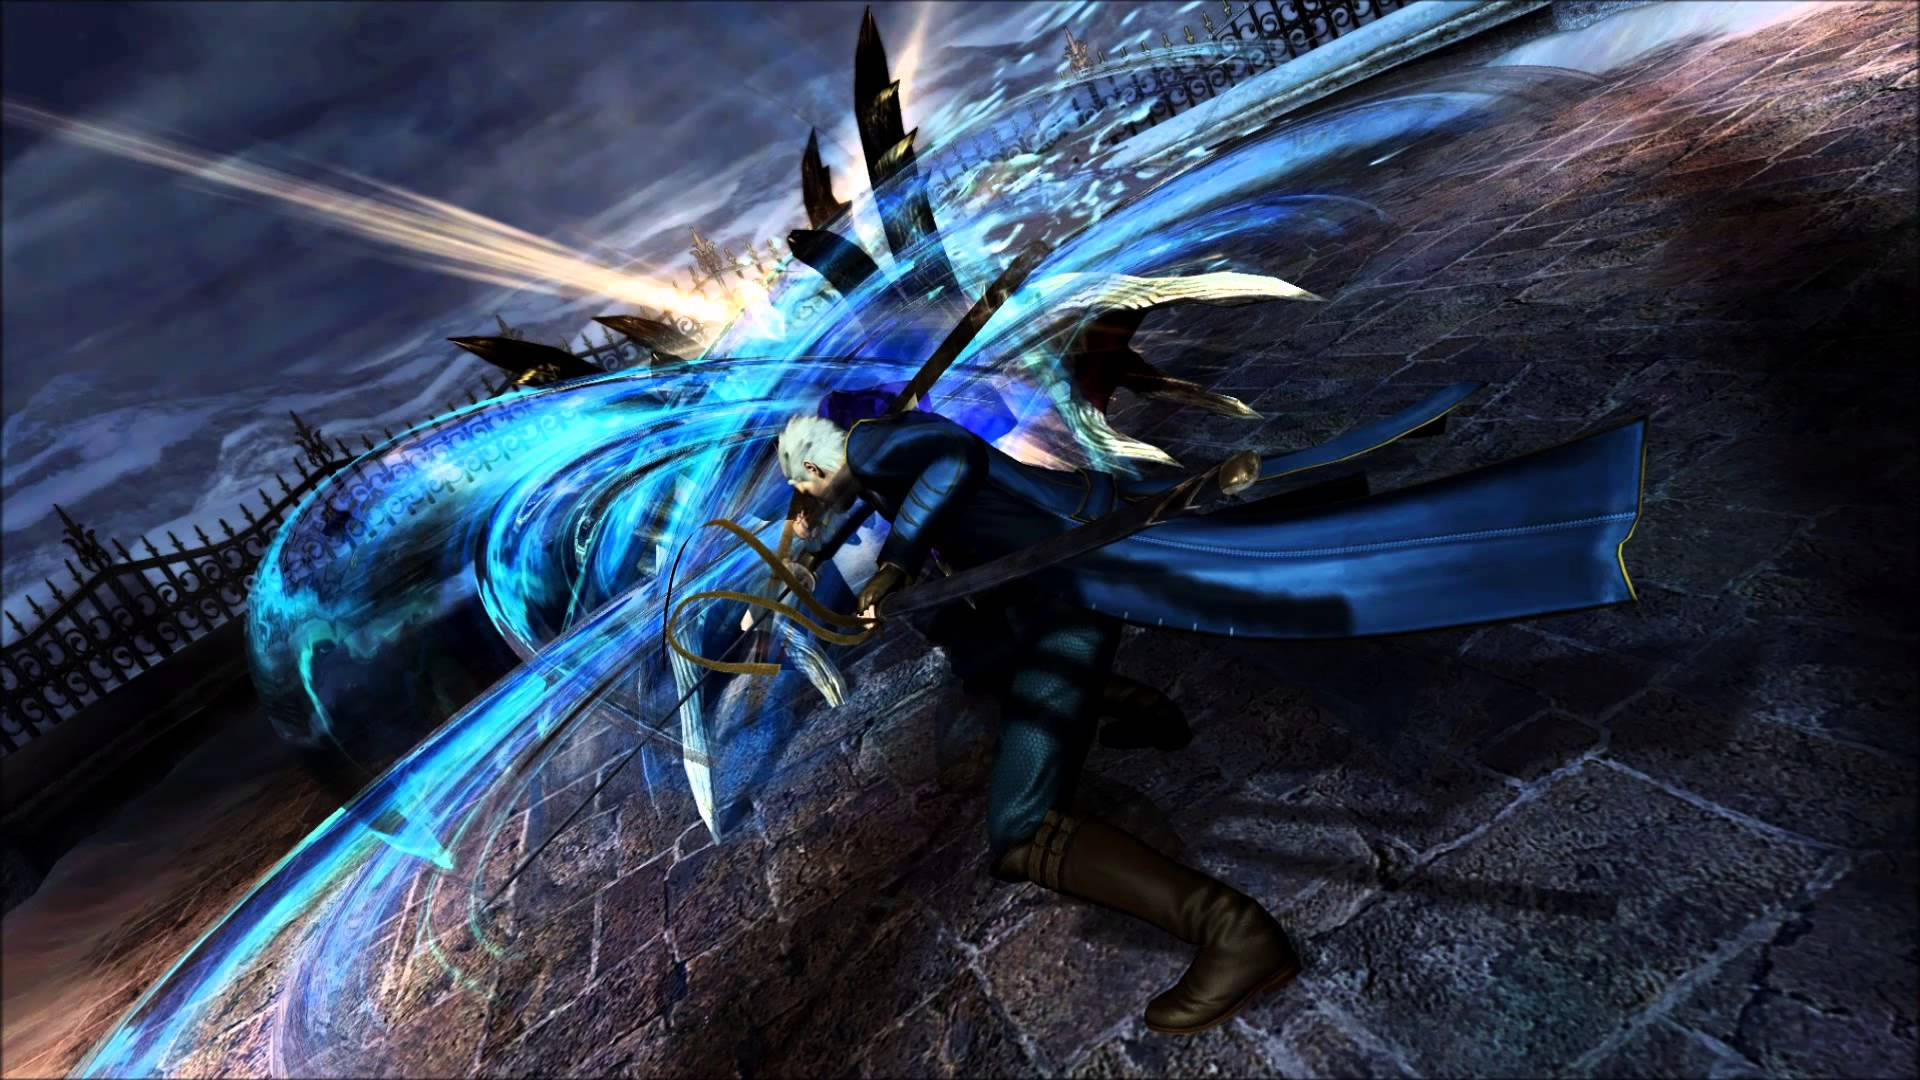 Download Vergil, the powerful demon hunter from Devil May Cry Wallpaper